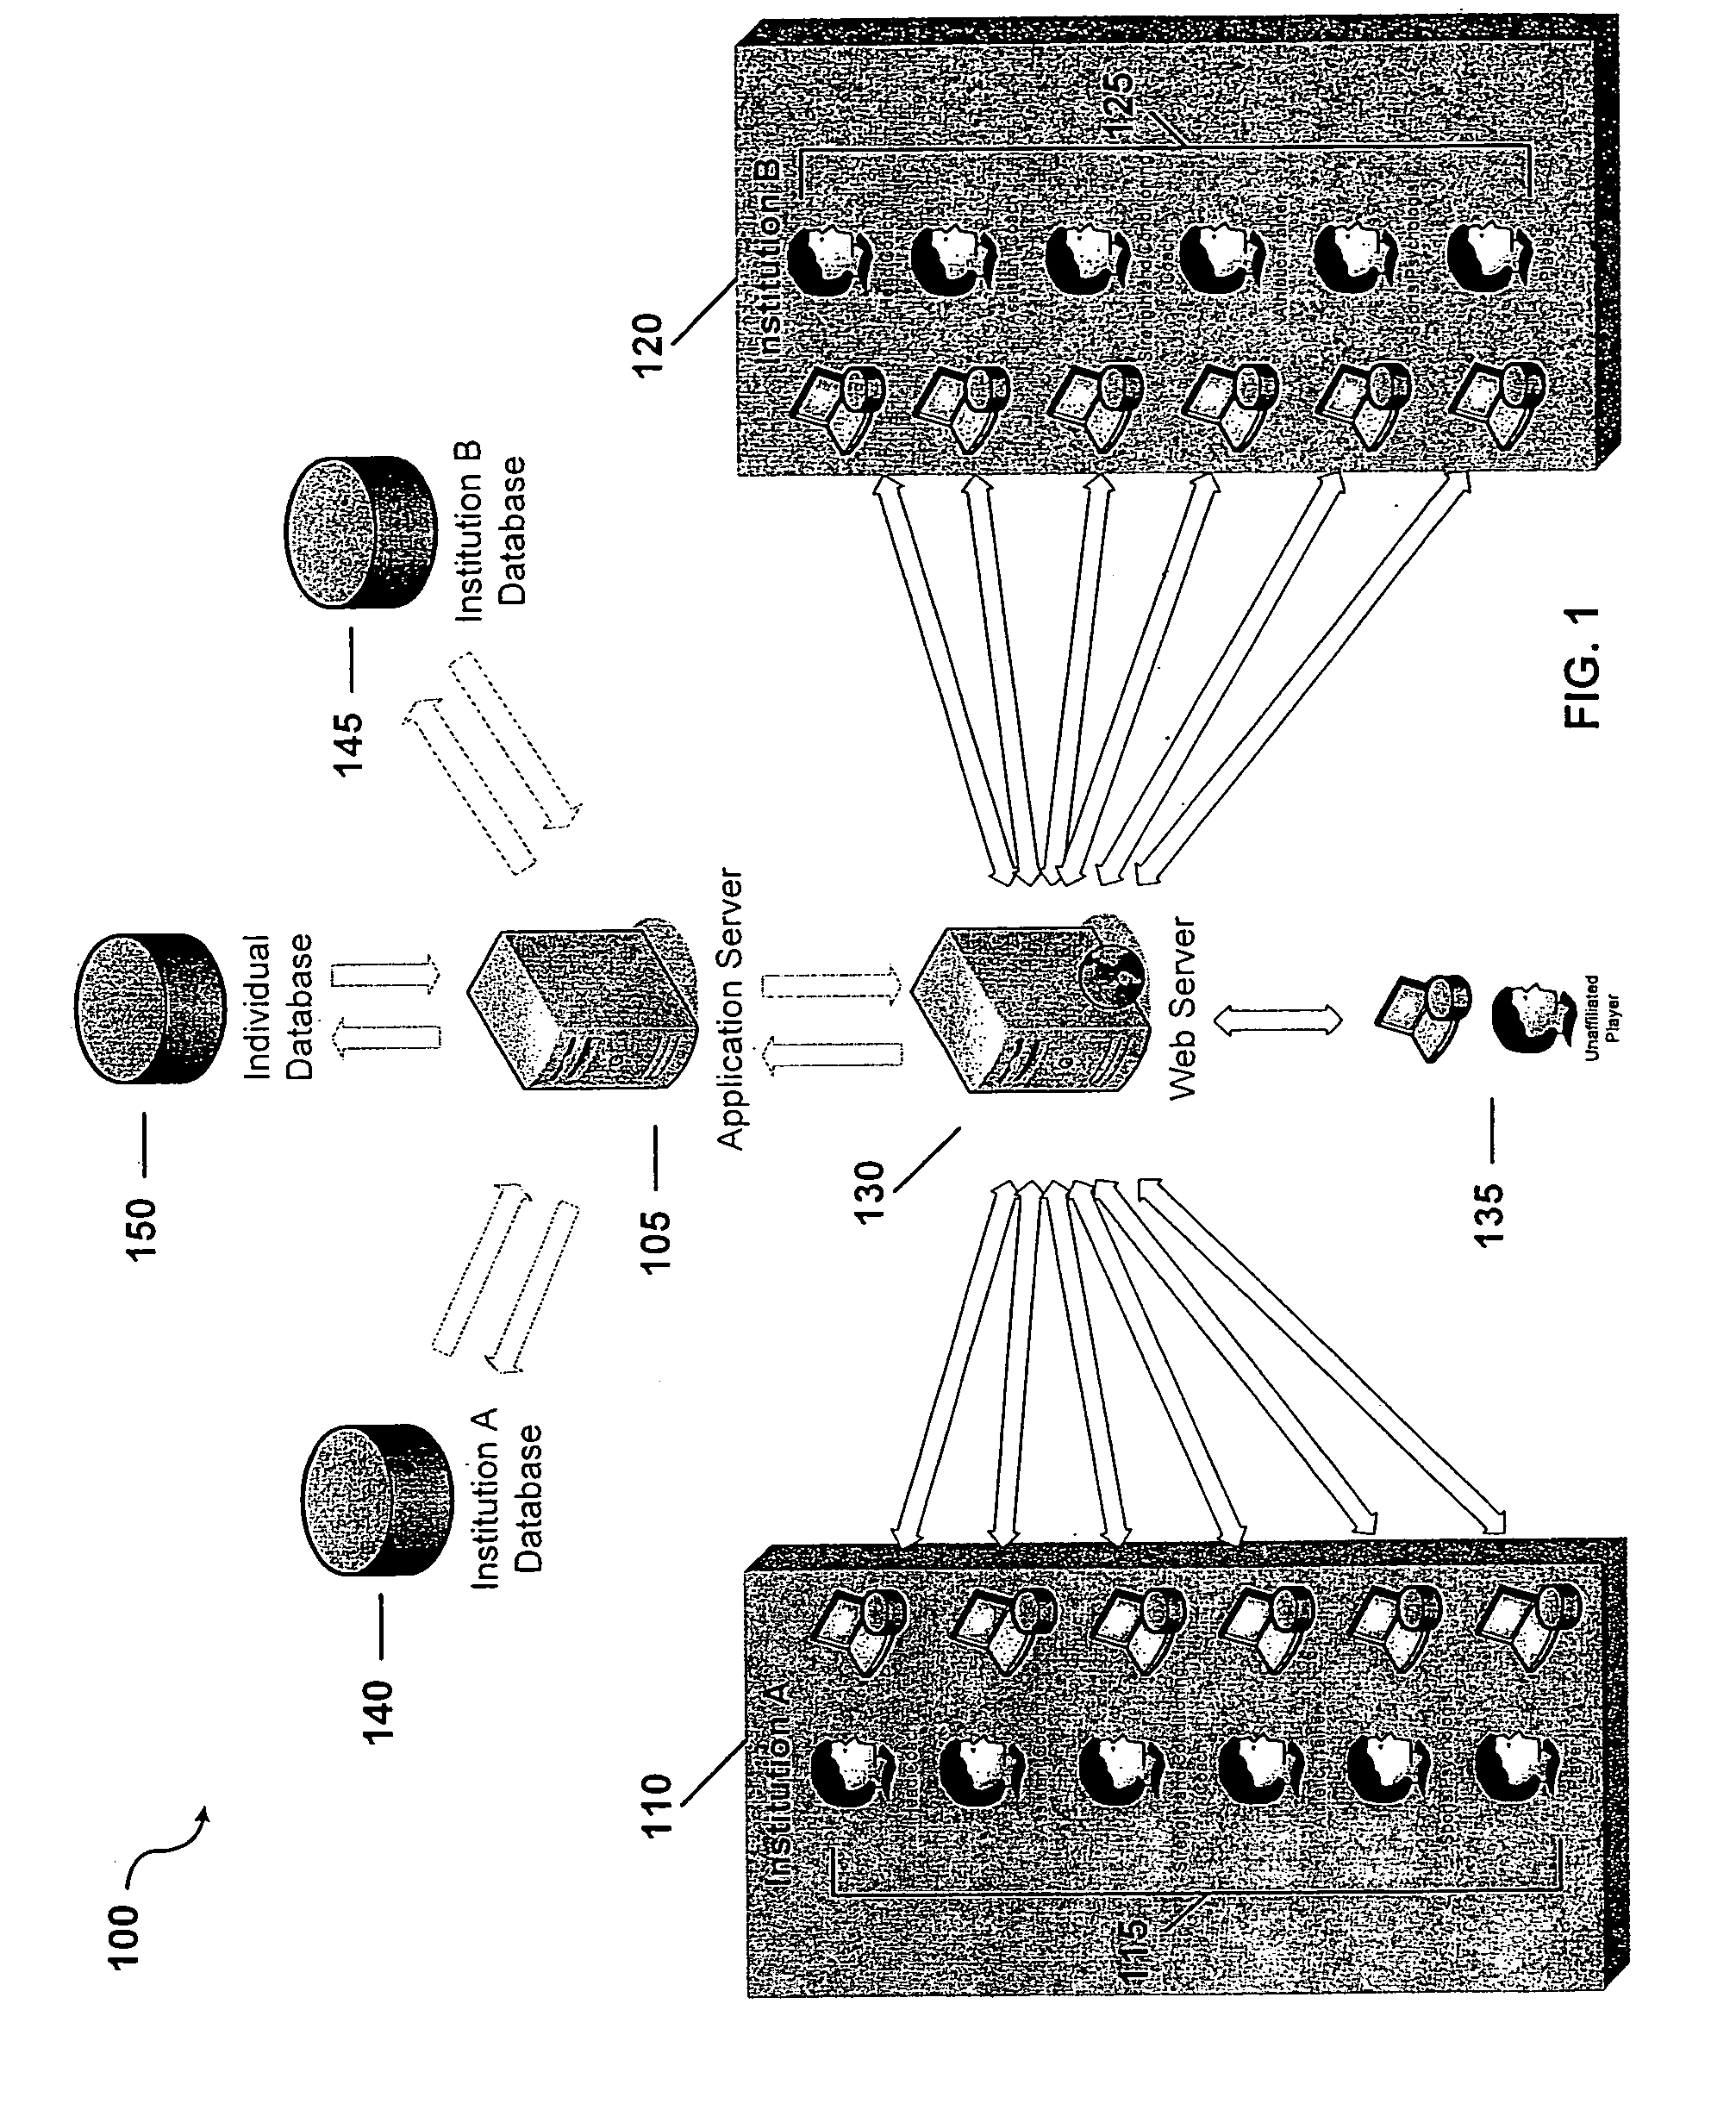 Systems and methods for integrating sports data and processes of sports activities and organizations on a computer network